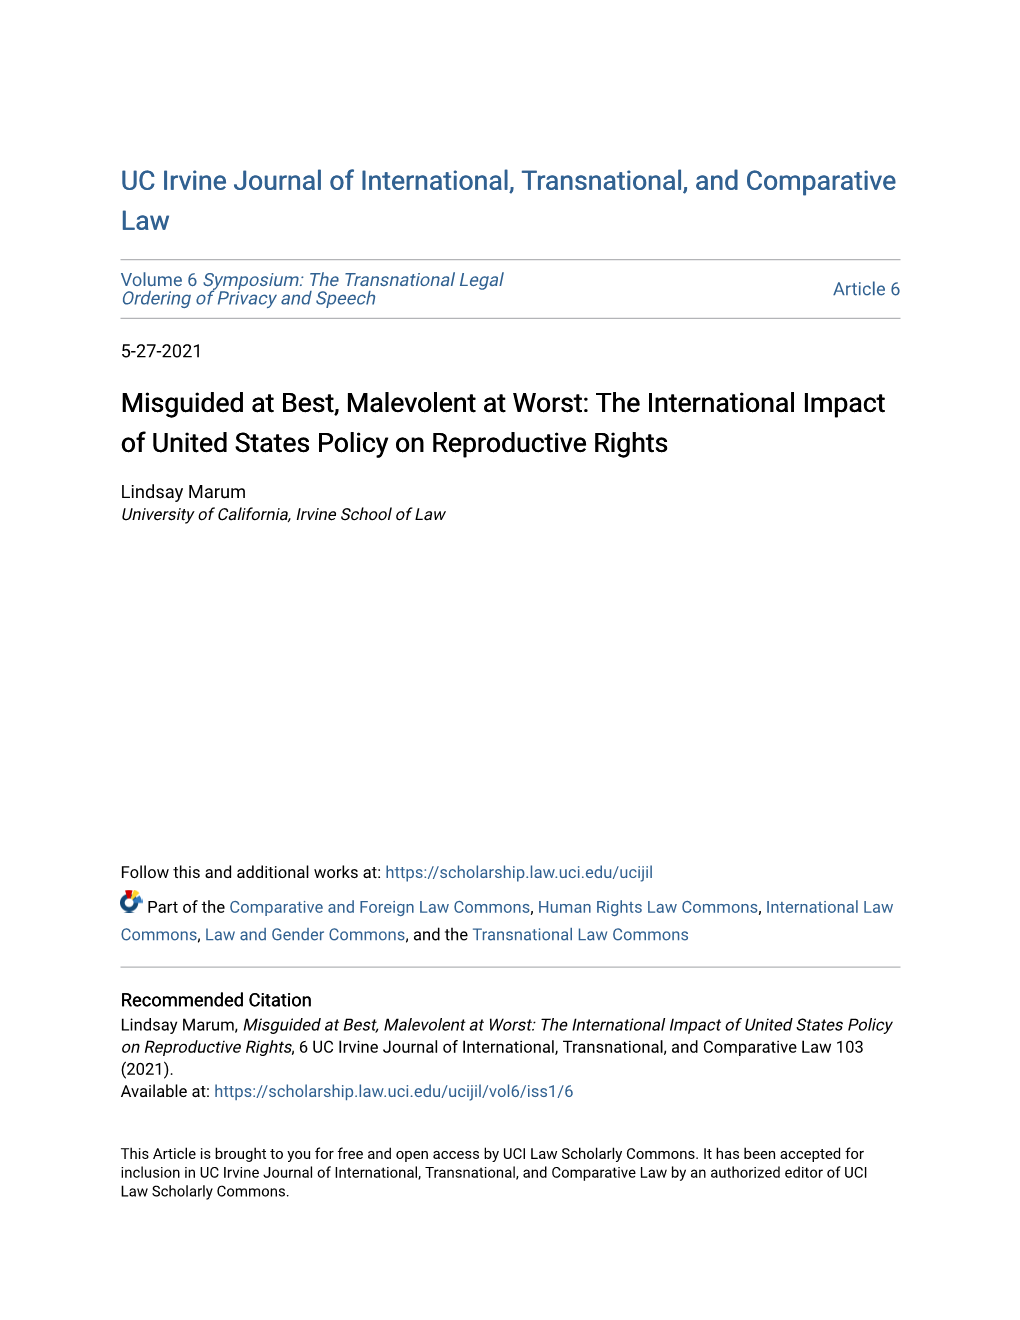 Misguided at Best, Malevolent at Worst: the International Impact of United States Policy on Reproductive Rights